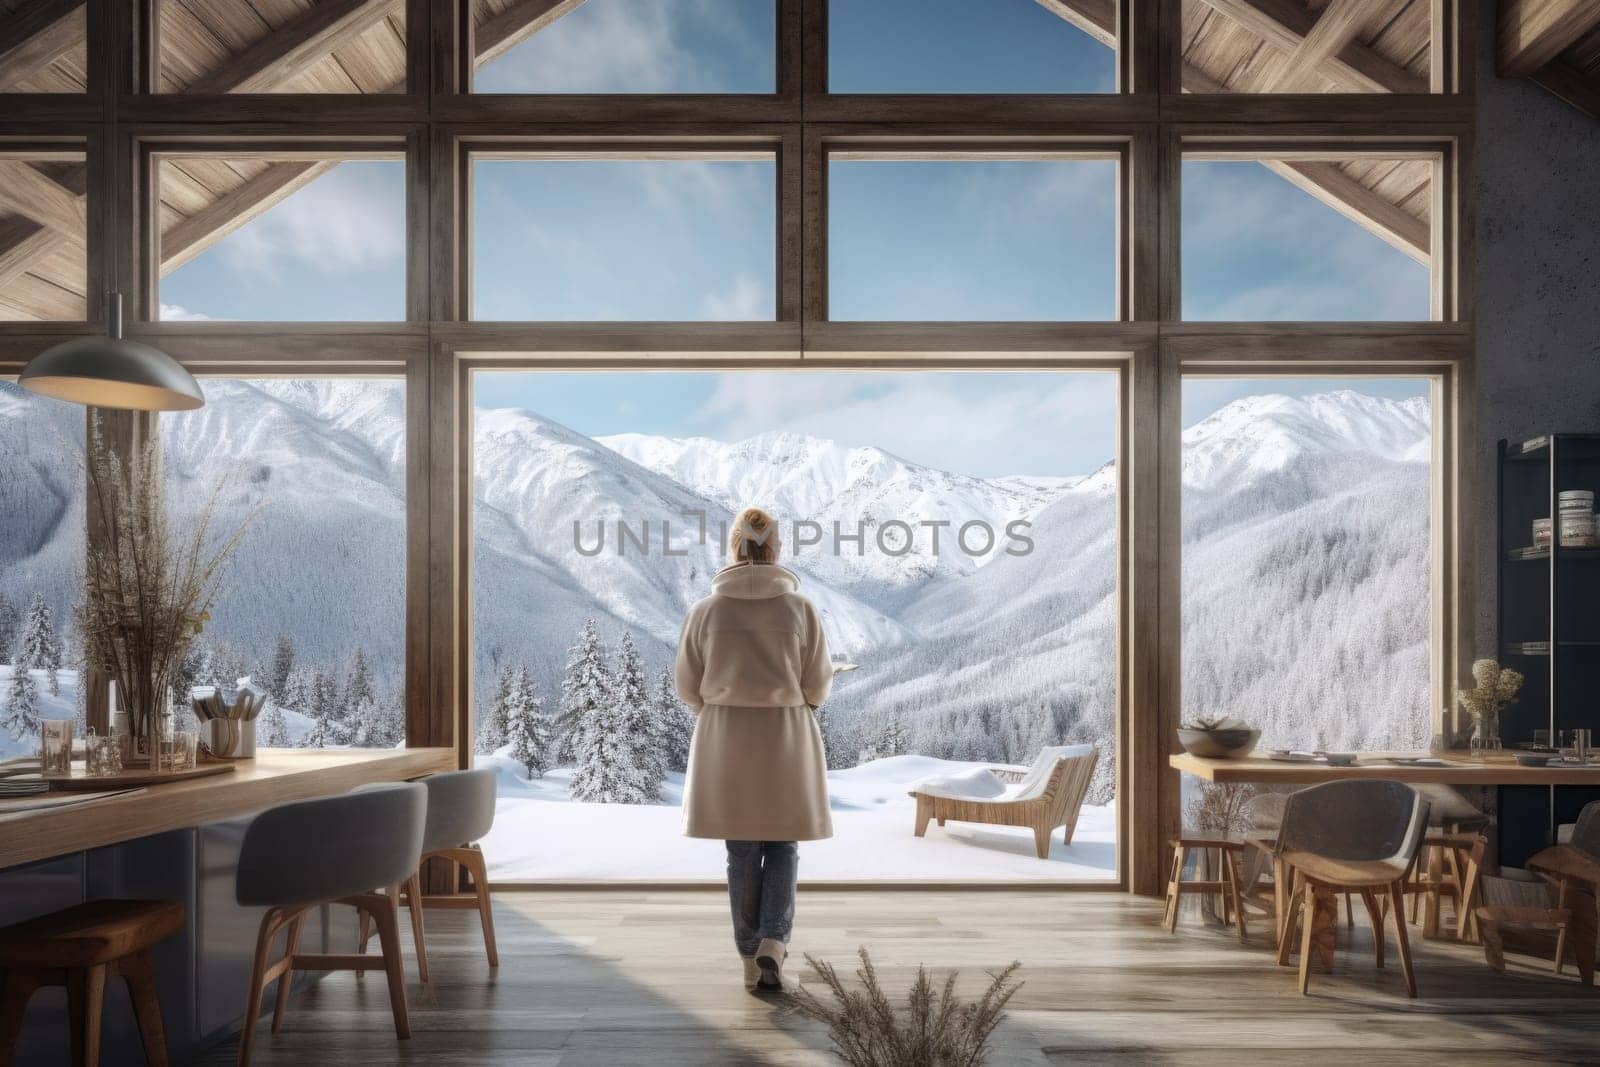 Traveler enjoying weekends inside contemporary barn house in the mountains. Happy tourist looking through panoramic windows in new cottage. comeliness